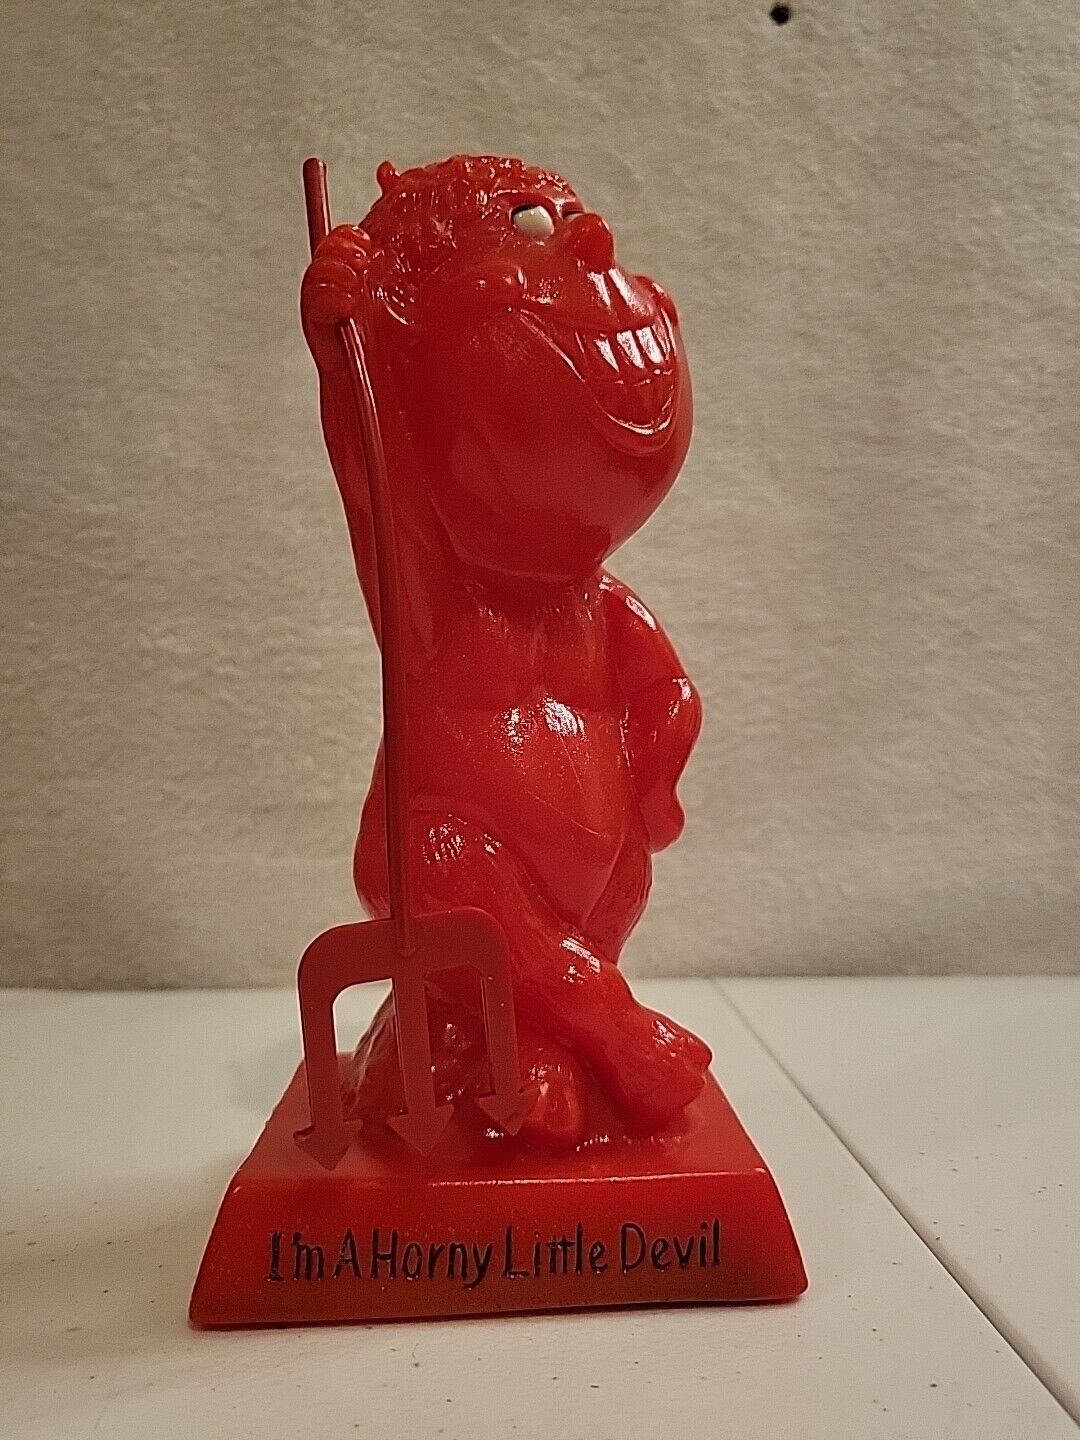 Vtg Mid-Century 1971 R & W Berries Co. Red I’M A HORNY LITTLE DEVIL Fun Gift